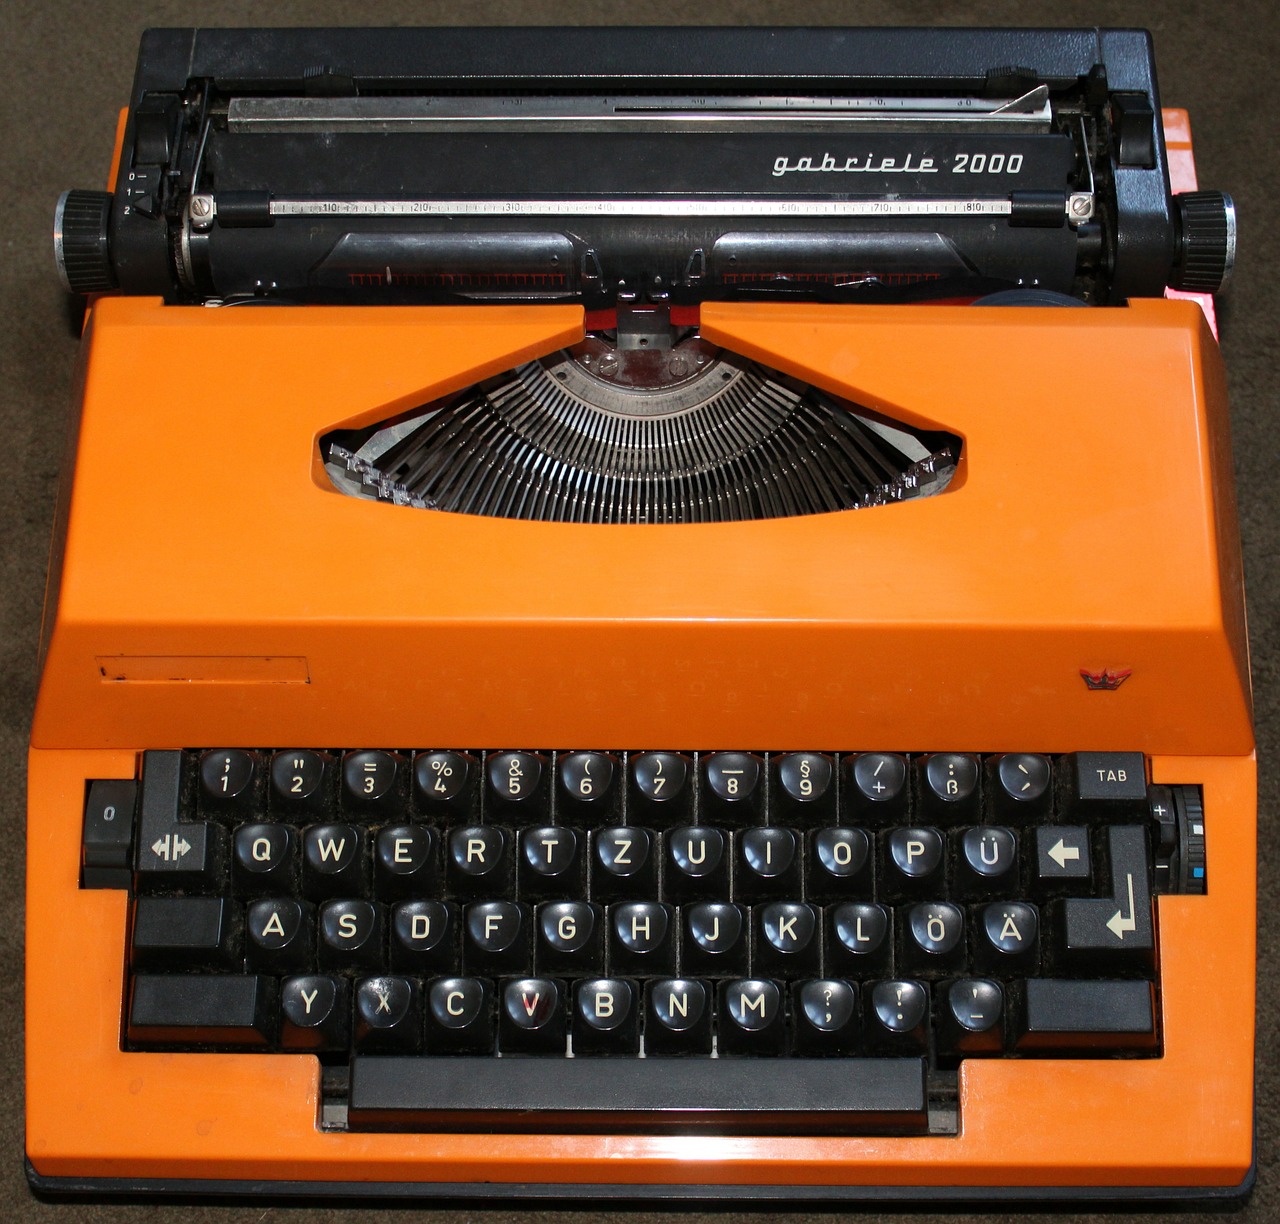 Download free photo of Typewriter,leave,old,mechanically,machine - from ...